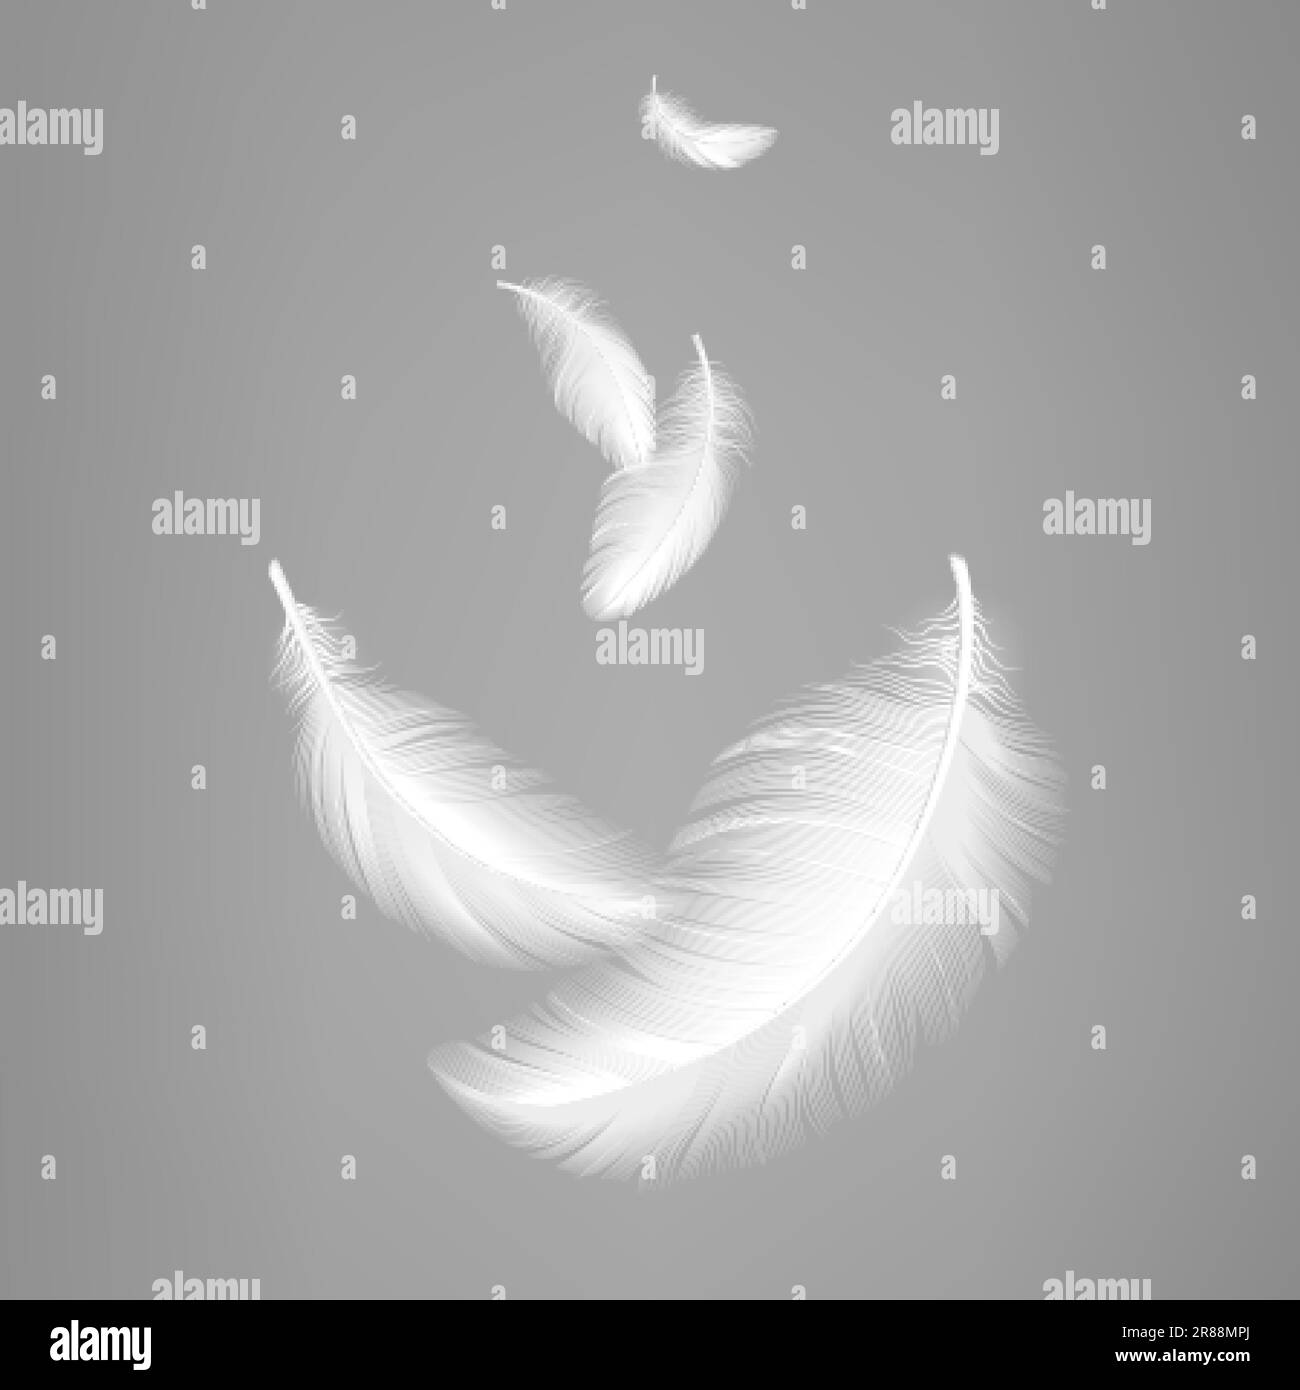 White flying realistic feathers. Bird feather composition, lightness effect of pillows or air. Vector decorative graphic elements Stock Vector